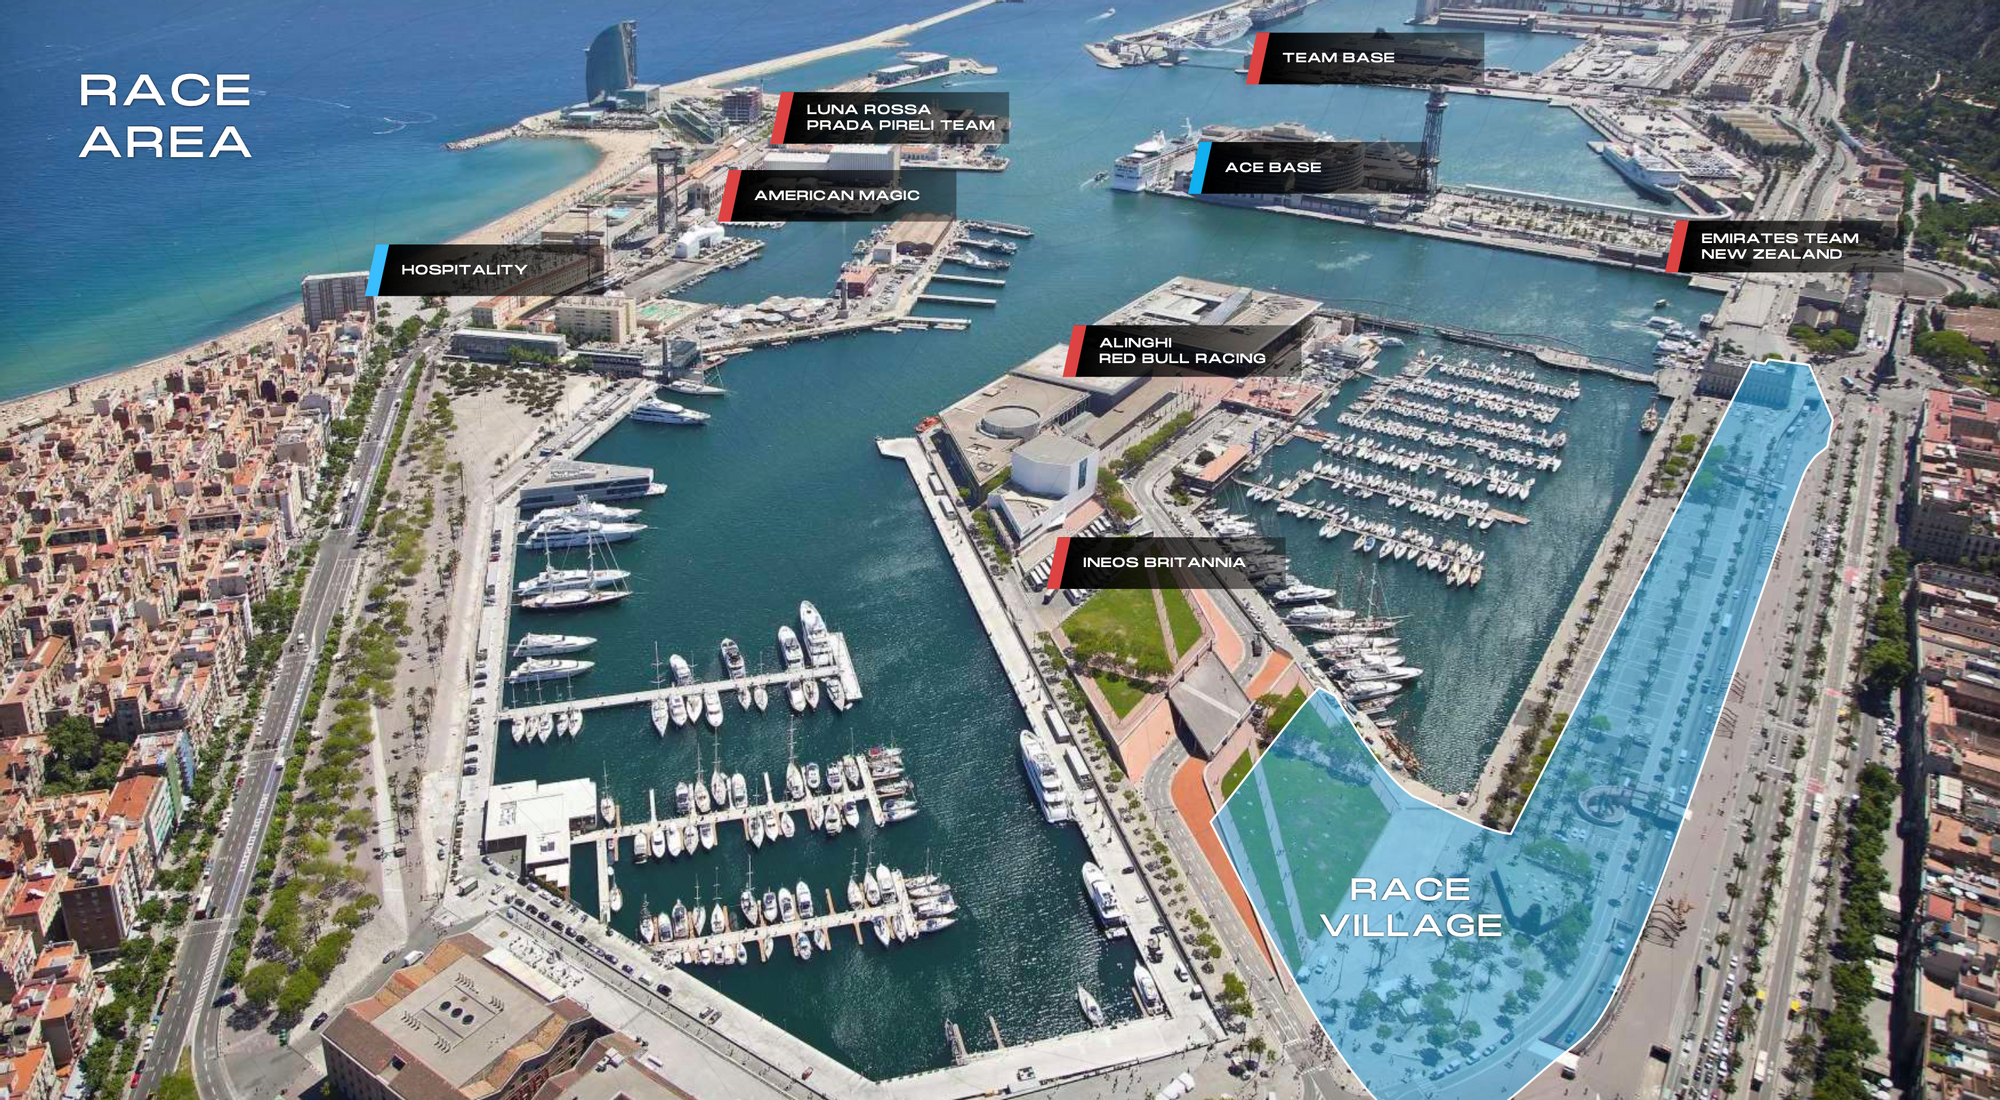 The race area has been defined for the 2024 America's Cup ©America's Cup